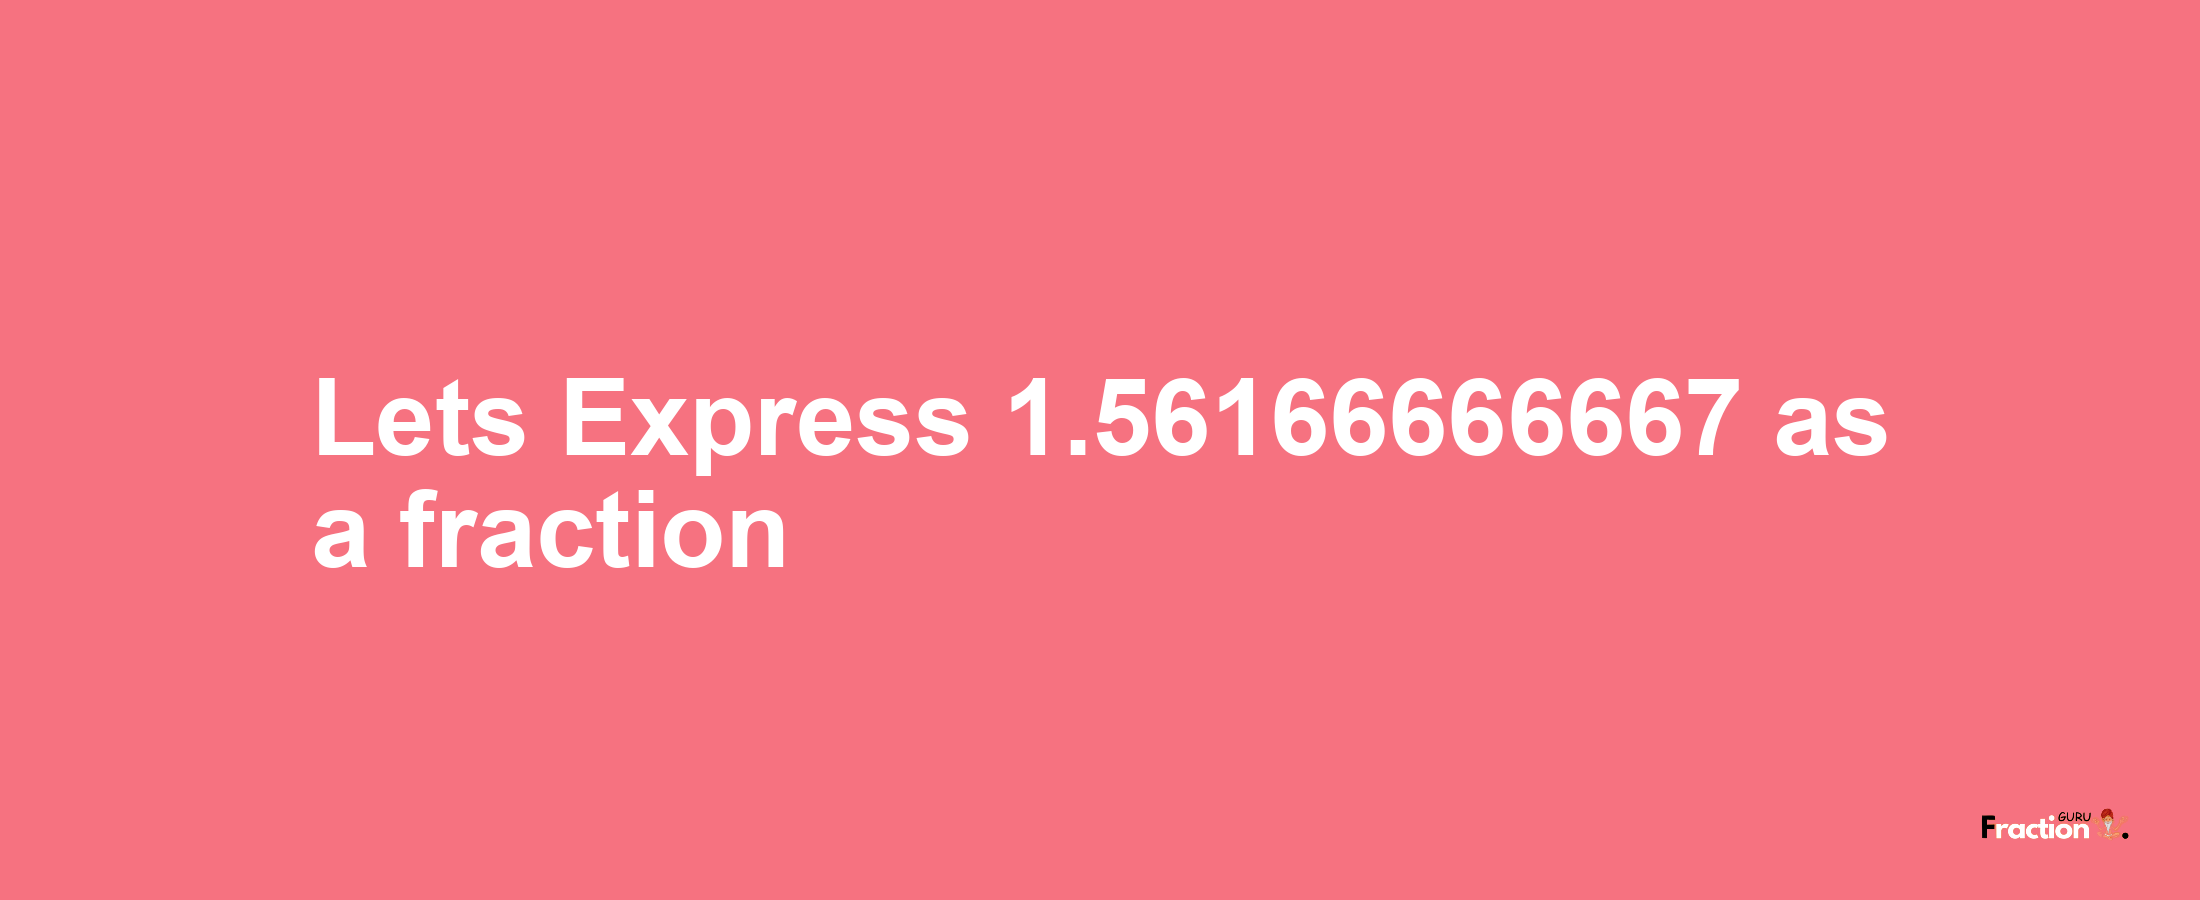 Lets Express 1.56166666667 as afraction